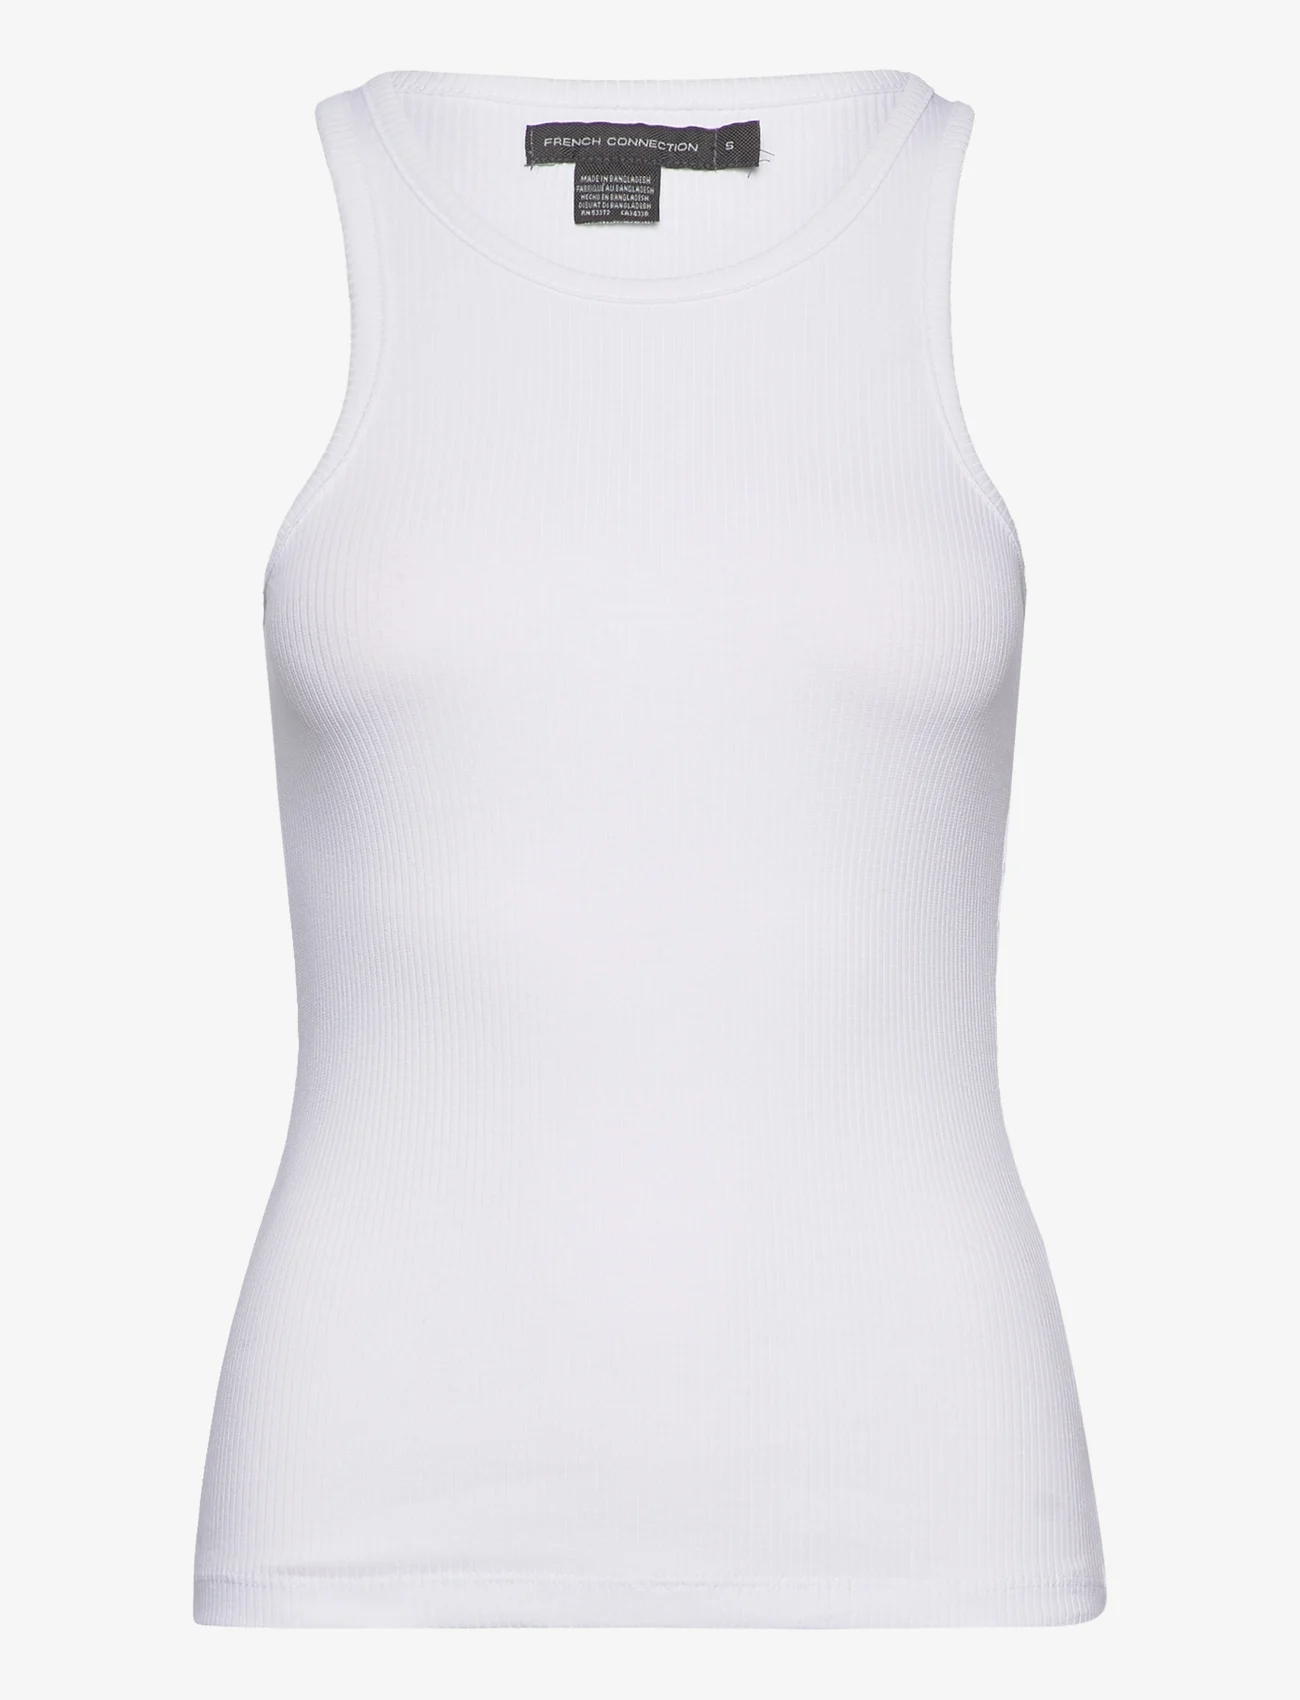 French Connection - RACER VEST - Ärmellose tops - white - 0